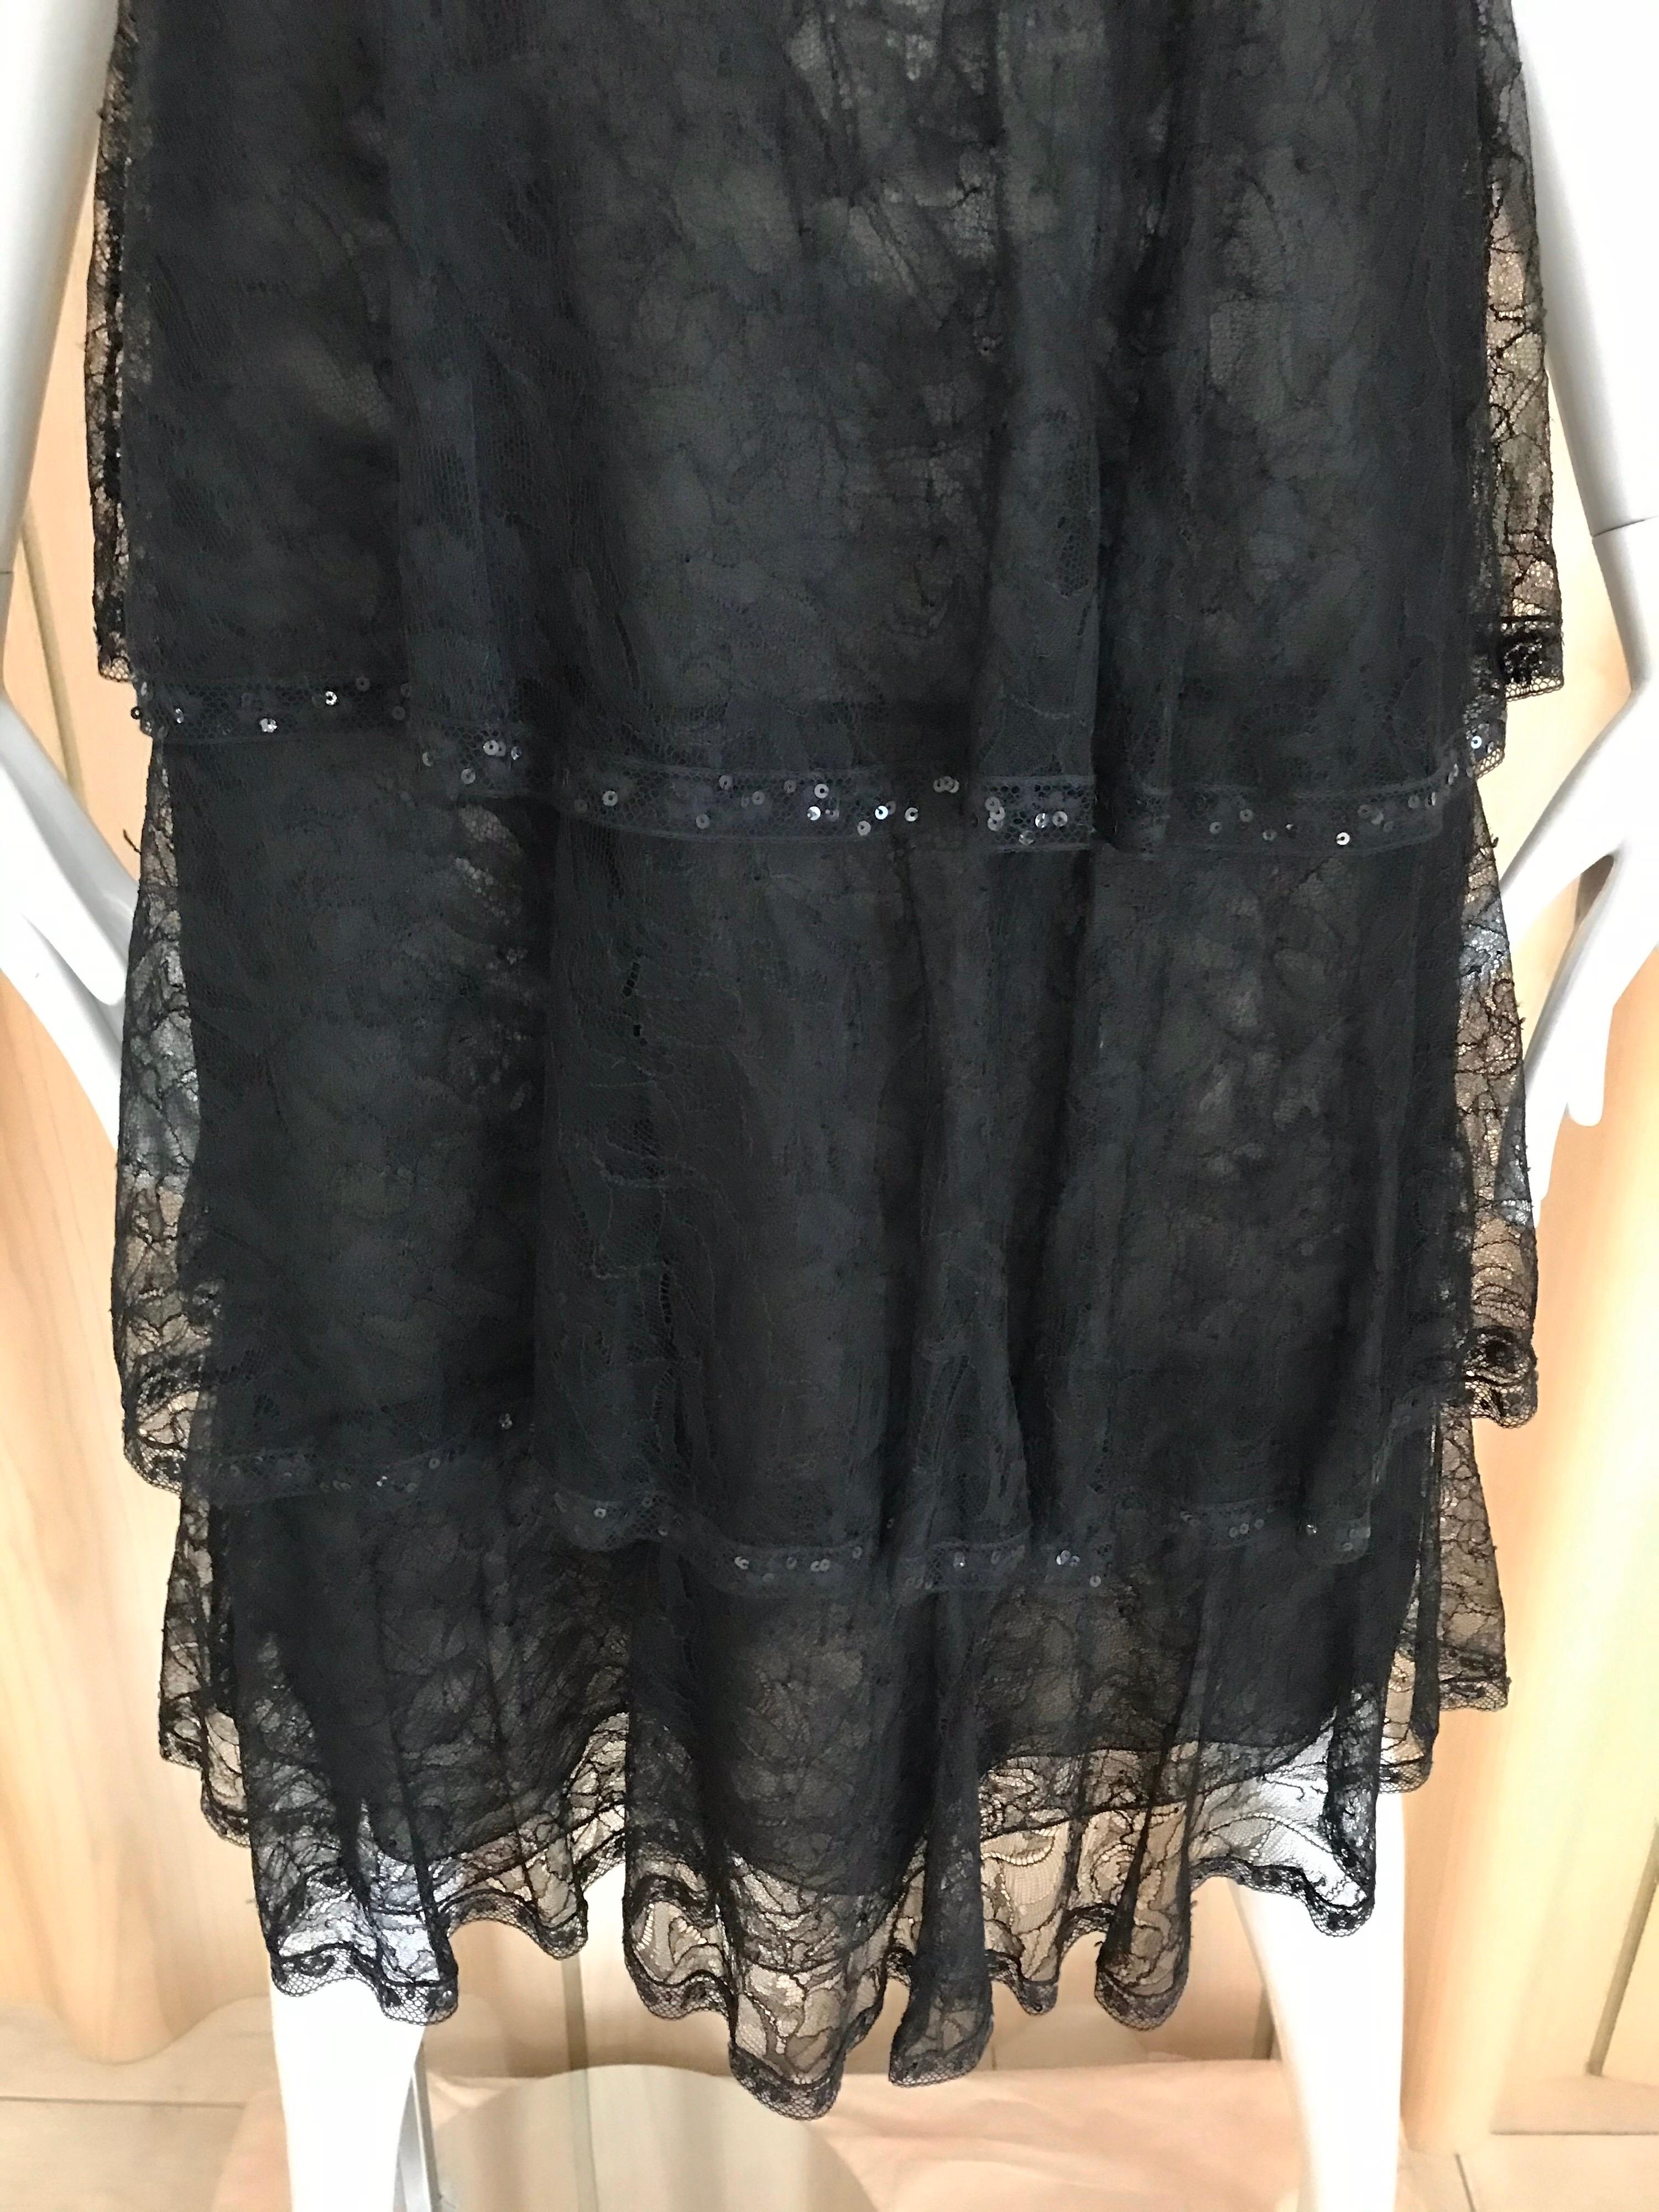 Chanel Black Lace Cocktail Dress at 1stDibs | chanel black lace dress ...